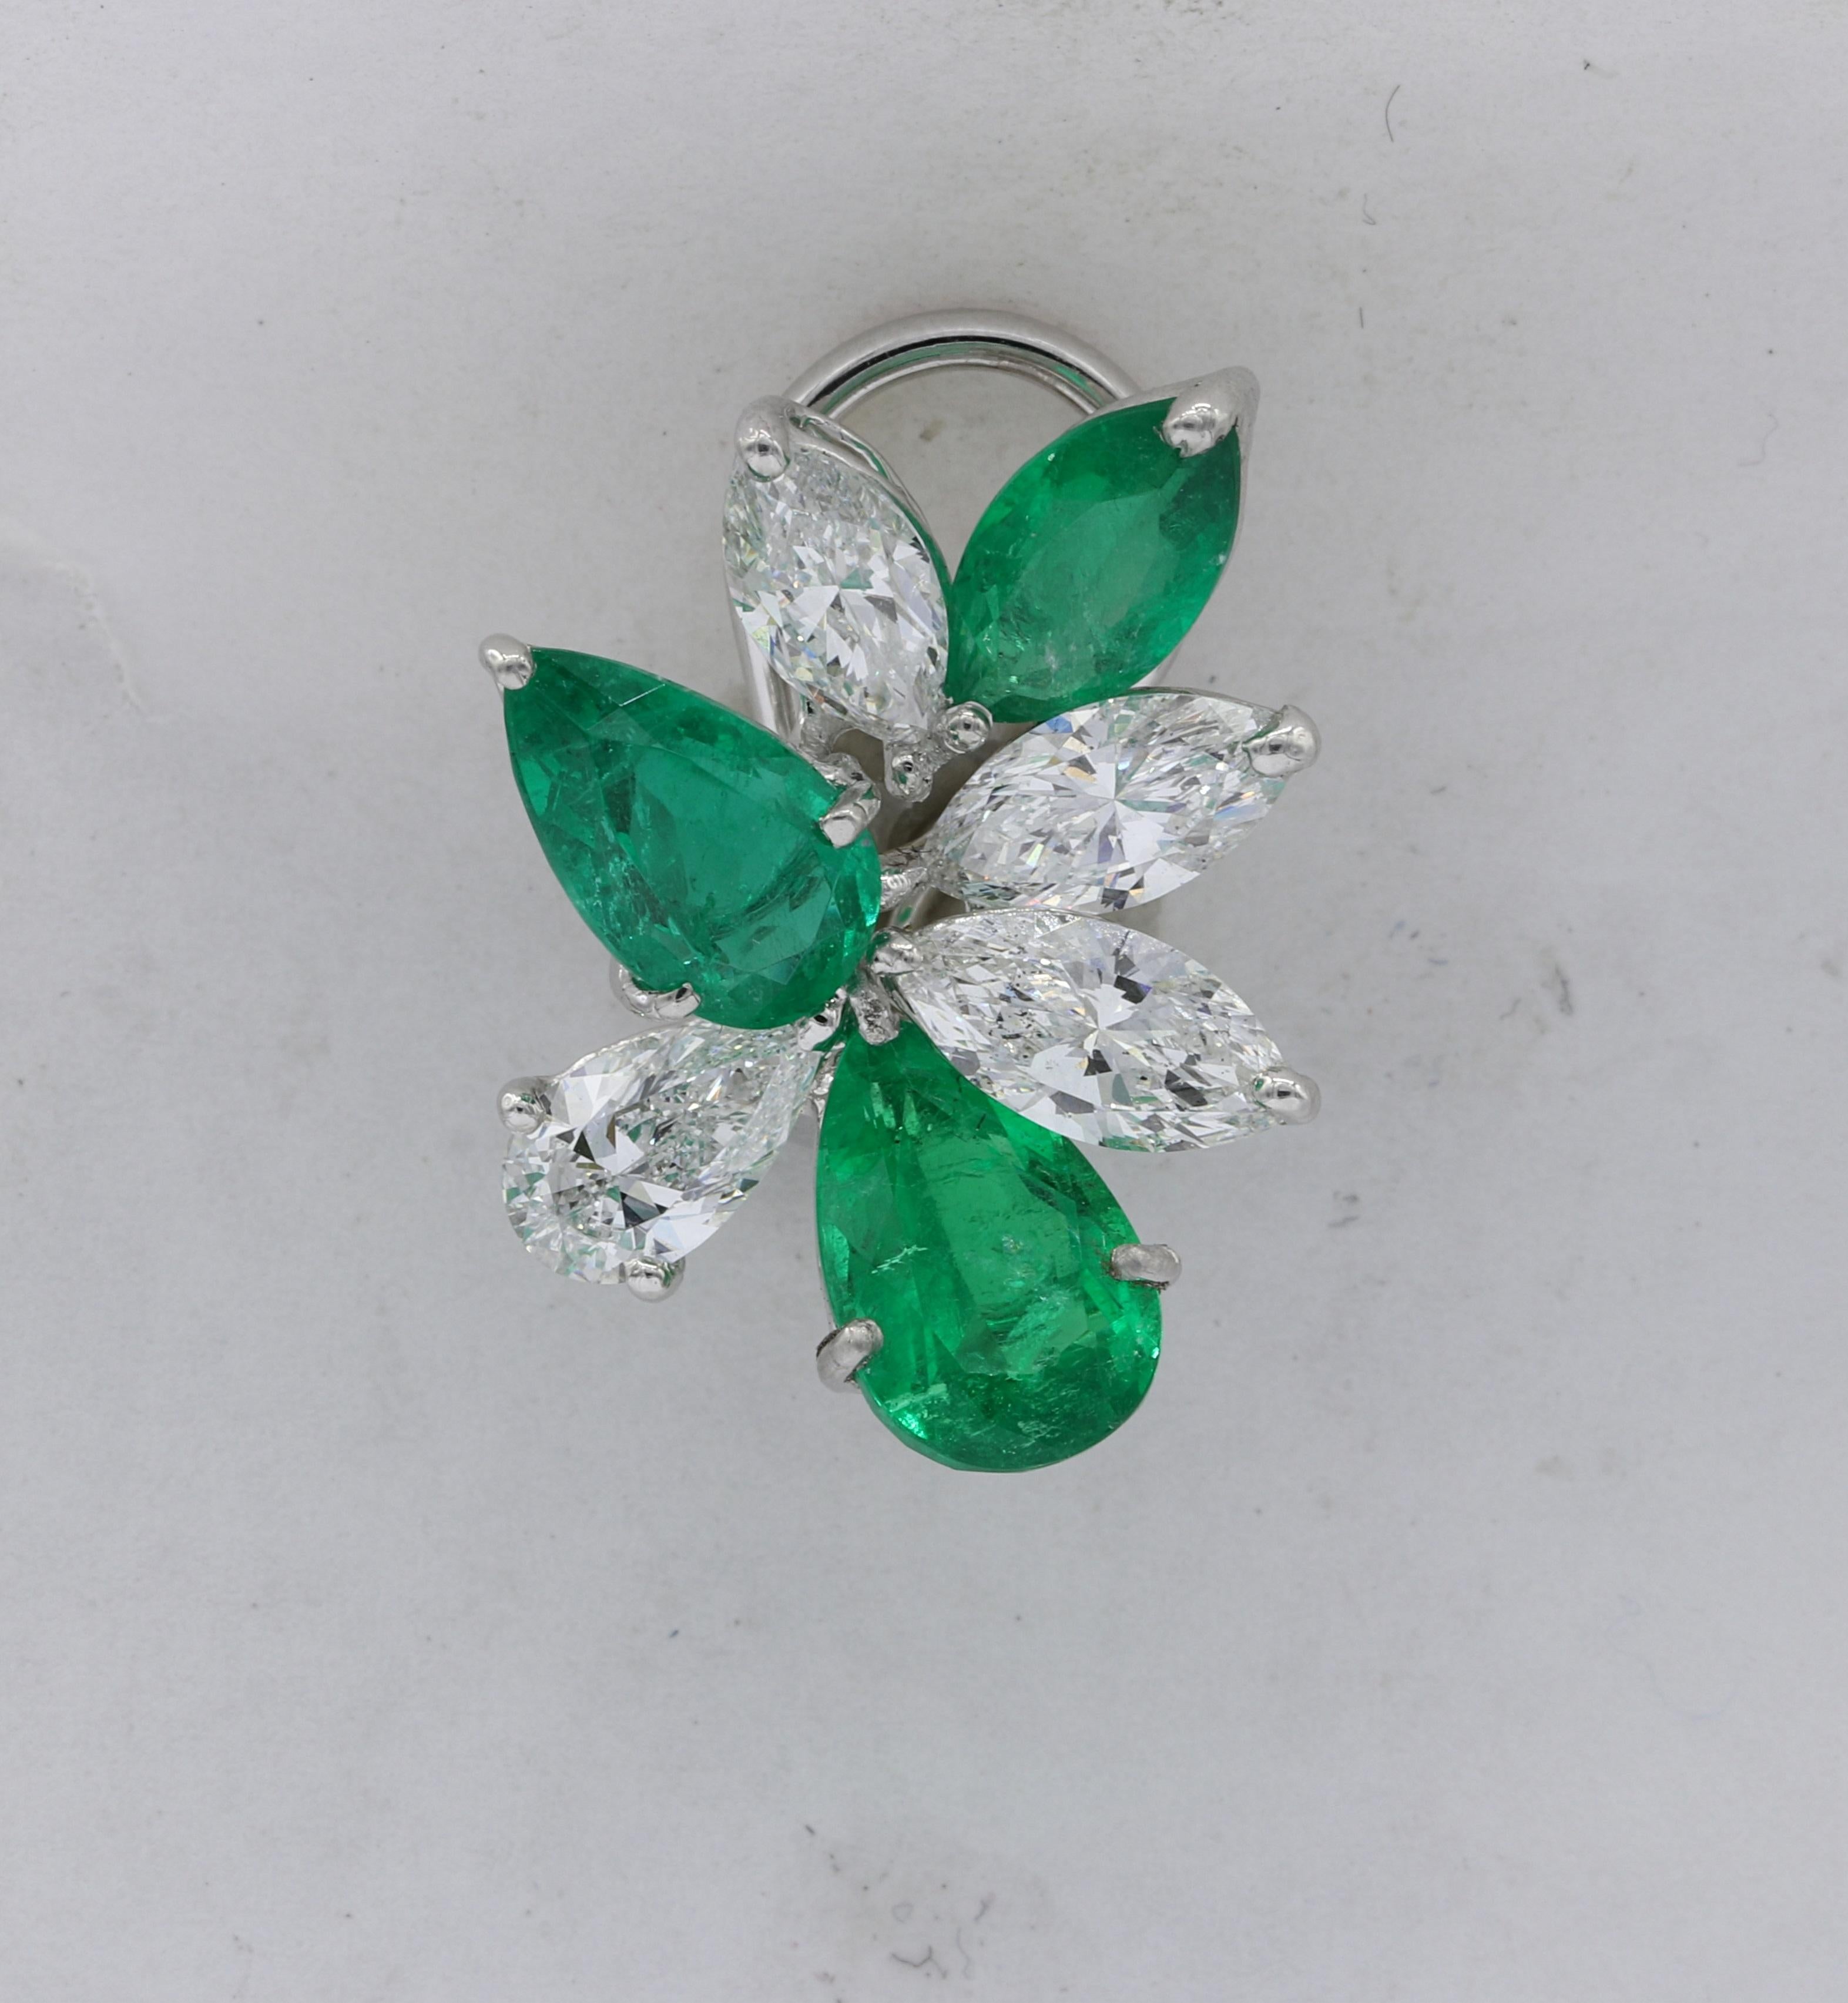 Platinum Emerald and Diamond Cluster Earrings, features 6.71 Carats of Colombian Emeralds with 4.01 Carats of diamonds. Stunning combination of color and shape